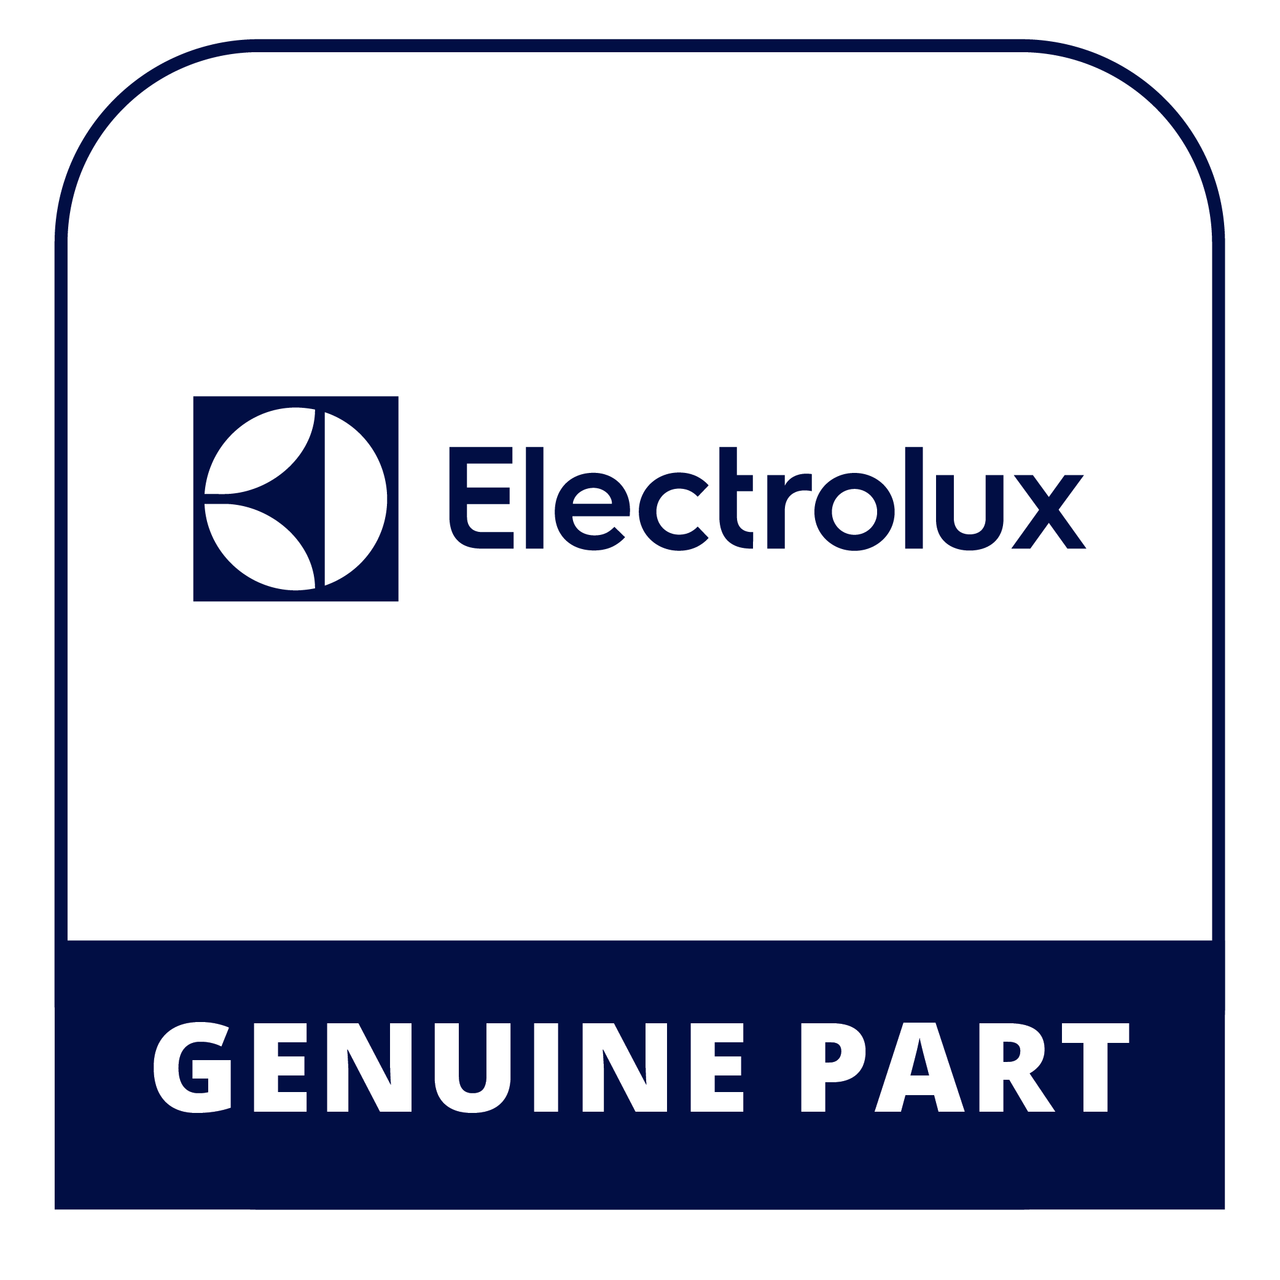 Frigidaire - Electrolux 316544301 Owners Manual - Genuine Electrolux Part